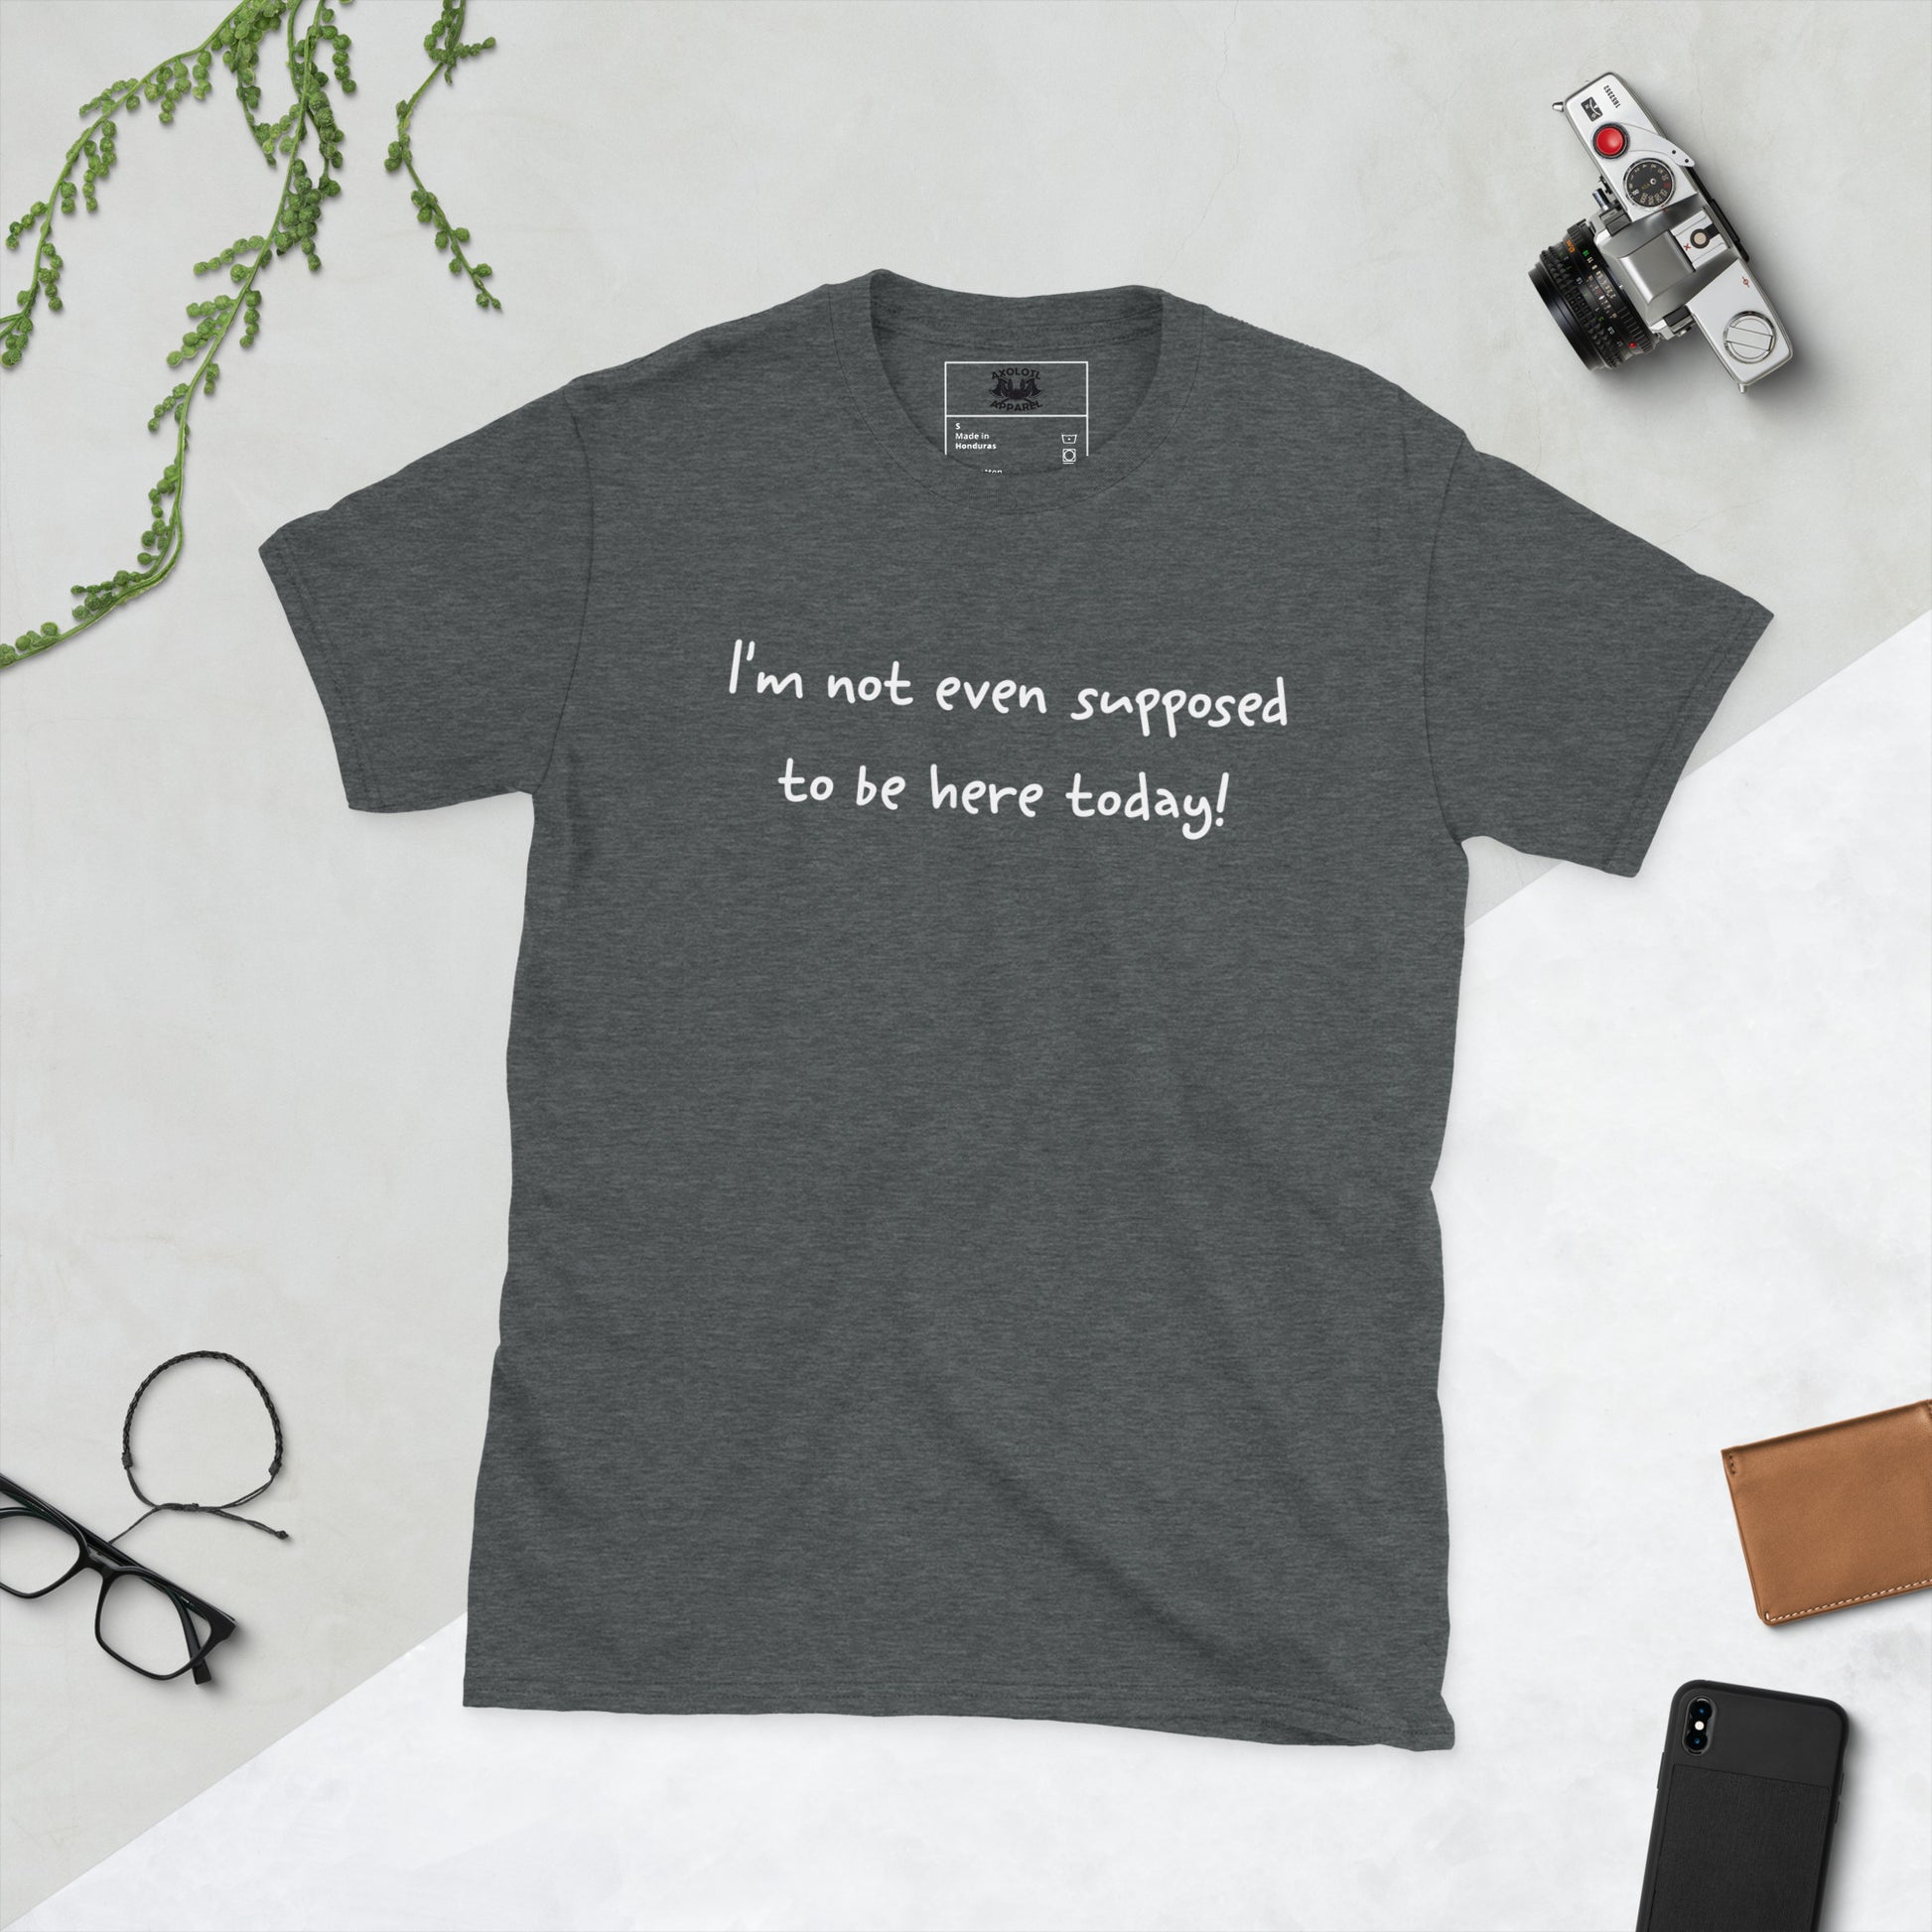 I'm Not Even Supposed to Be Here Today Short Sleeve Unisex T-Shirt Dark Grey Flat